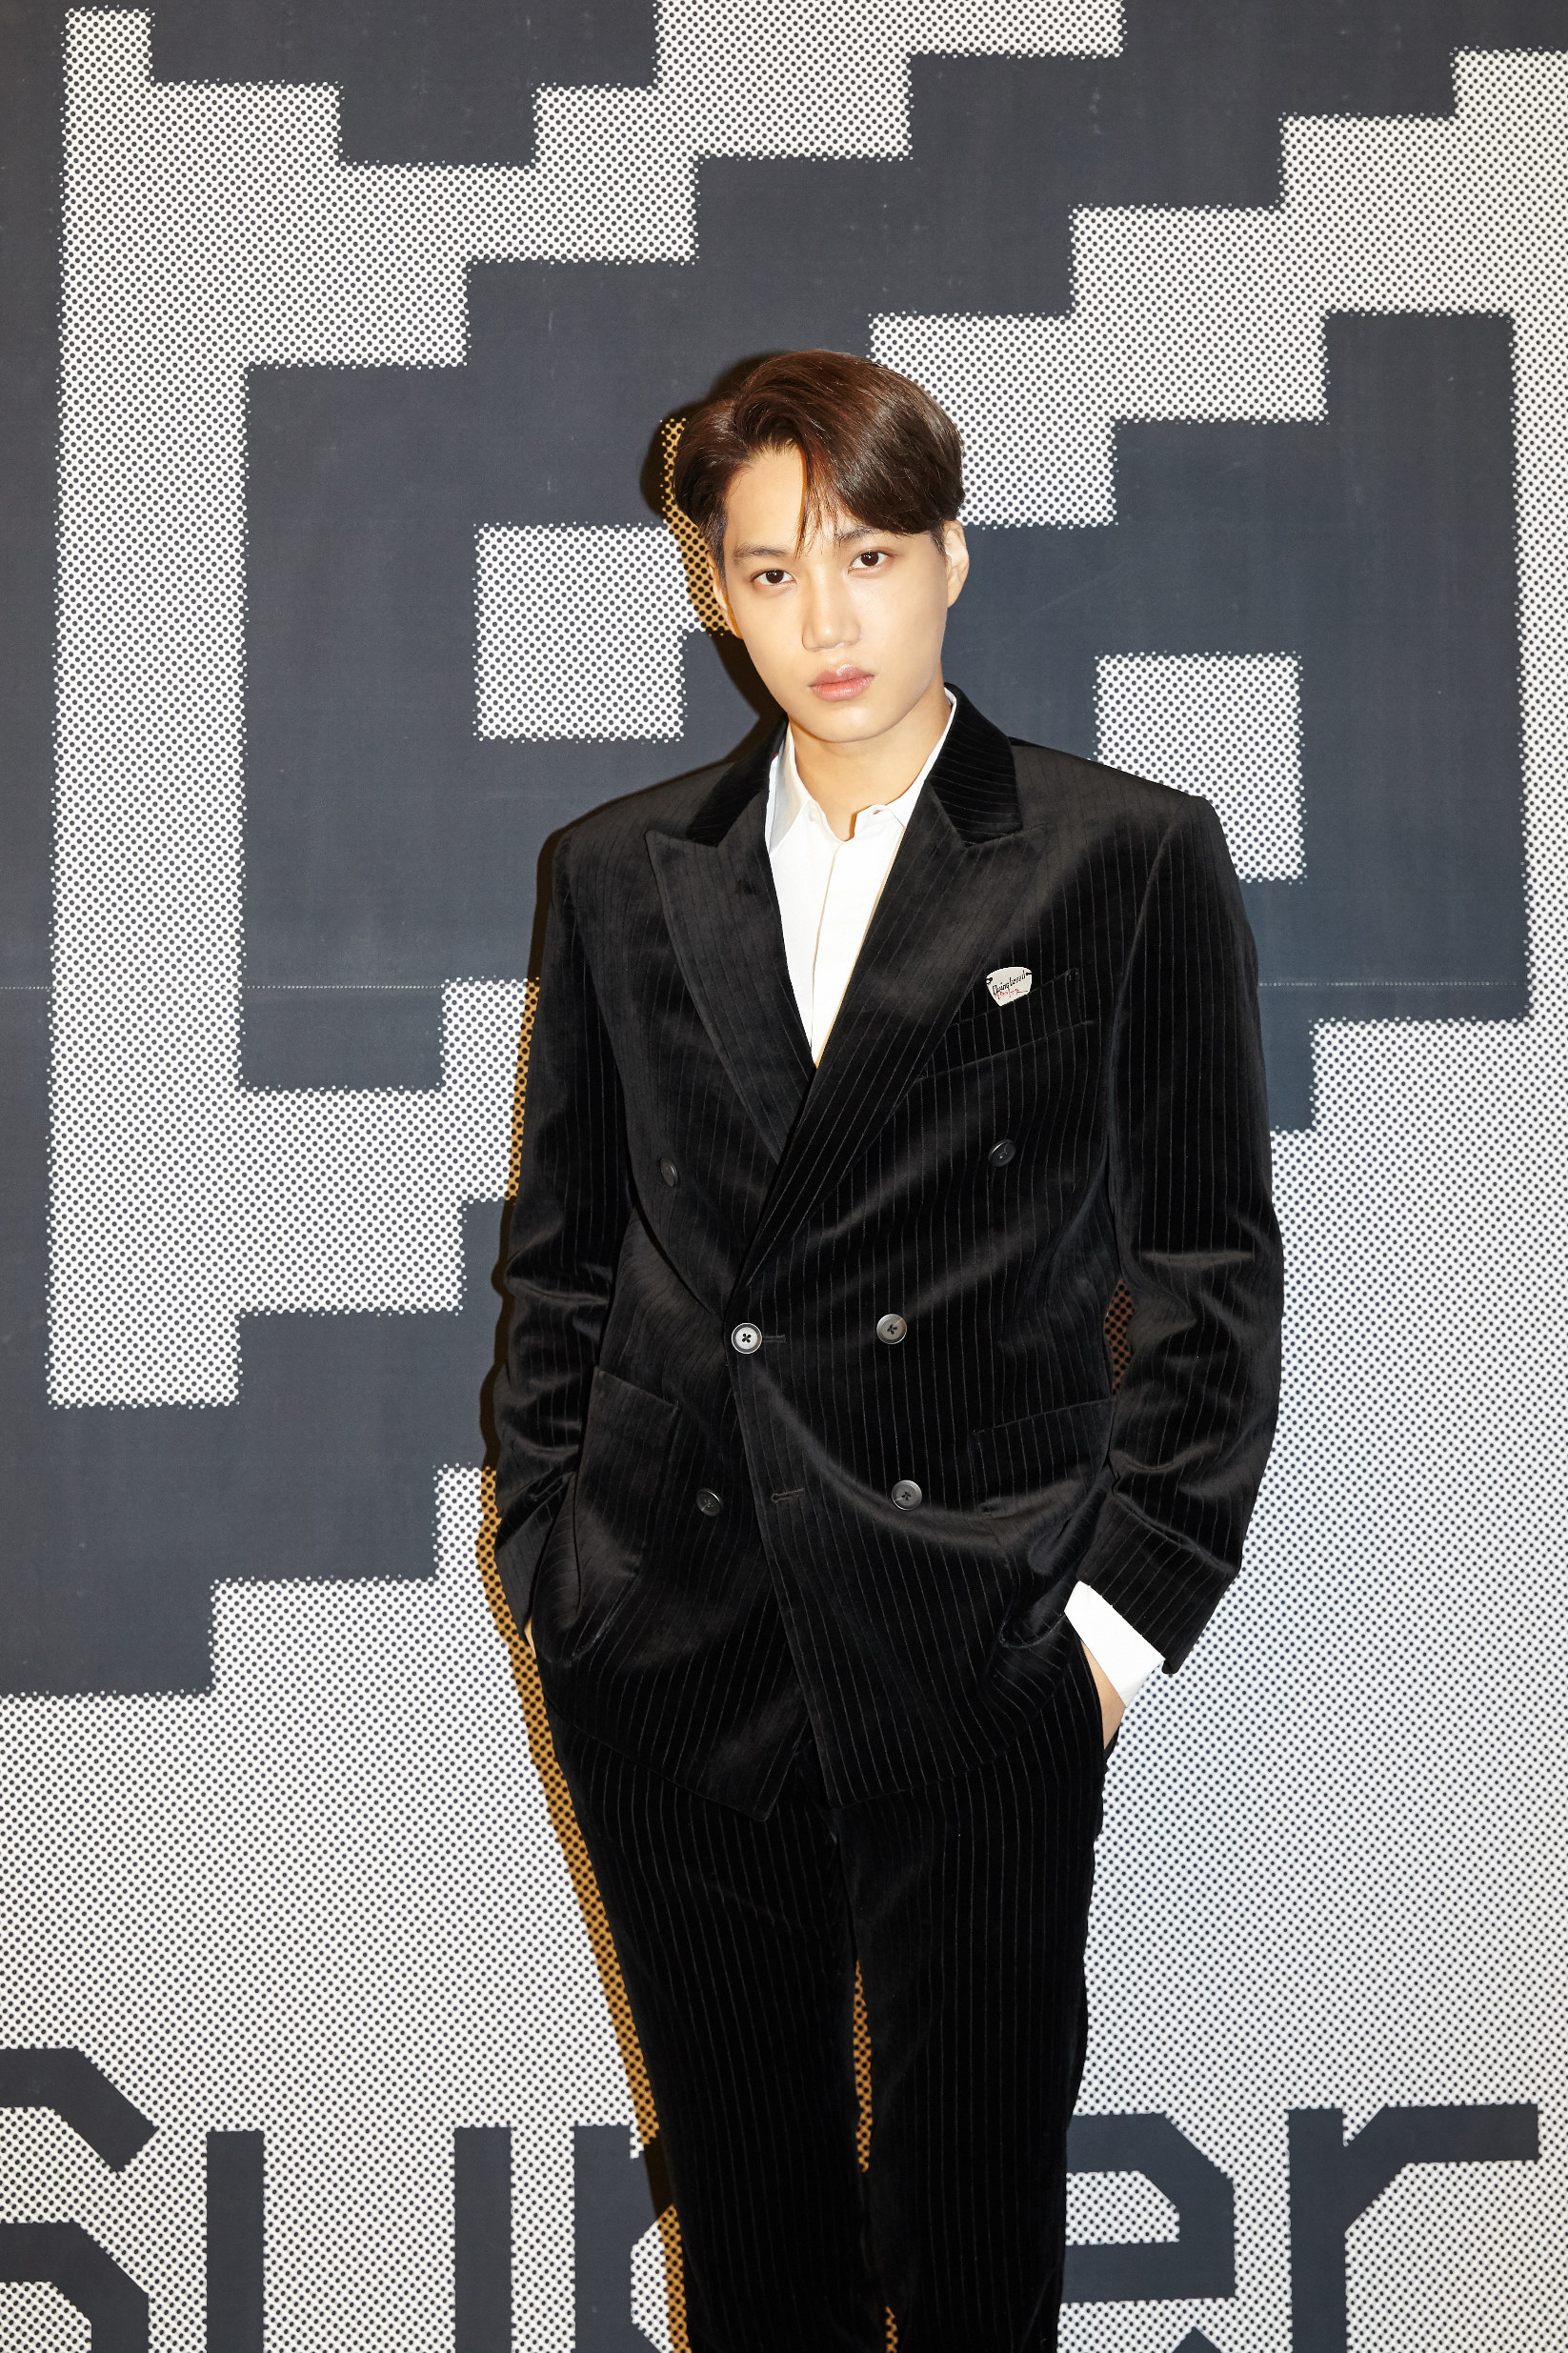 Kai stands with both hands in the pockets of his velvet pinstripe suit